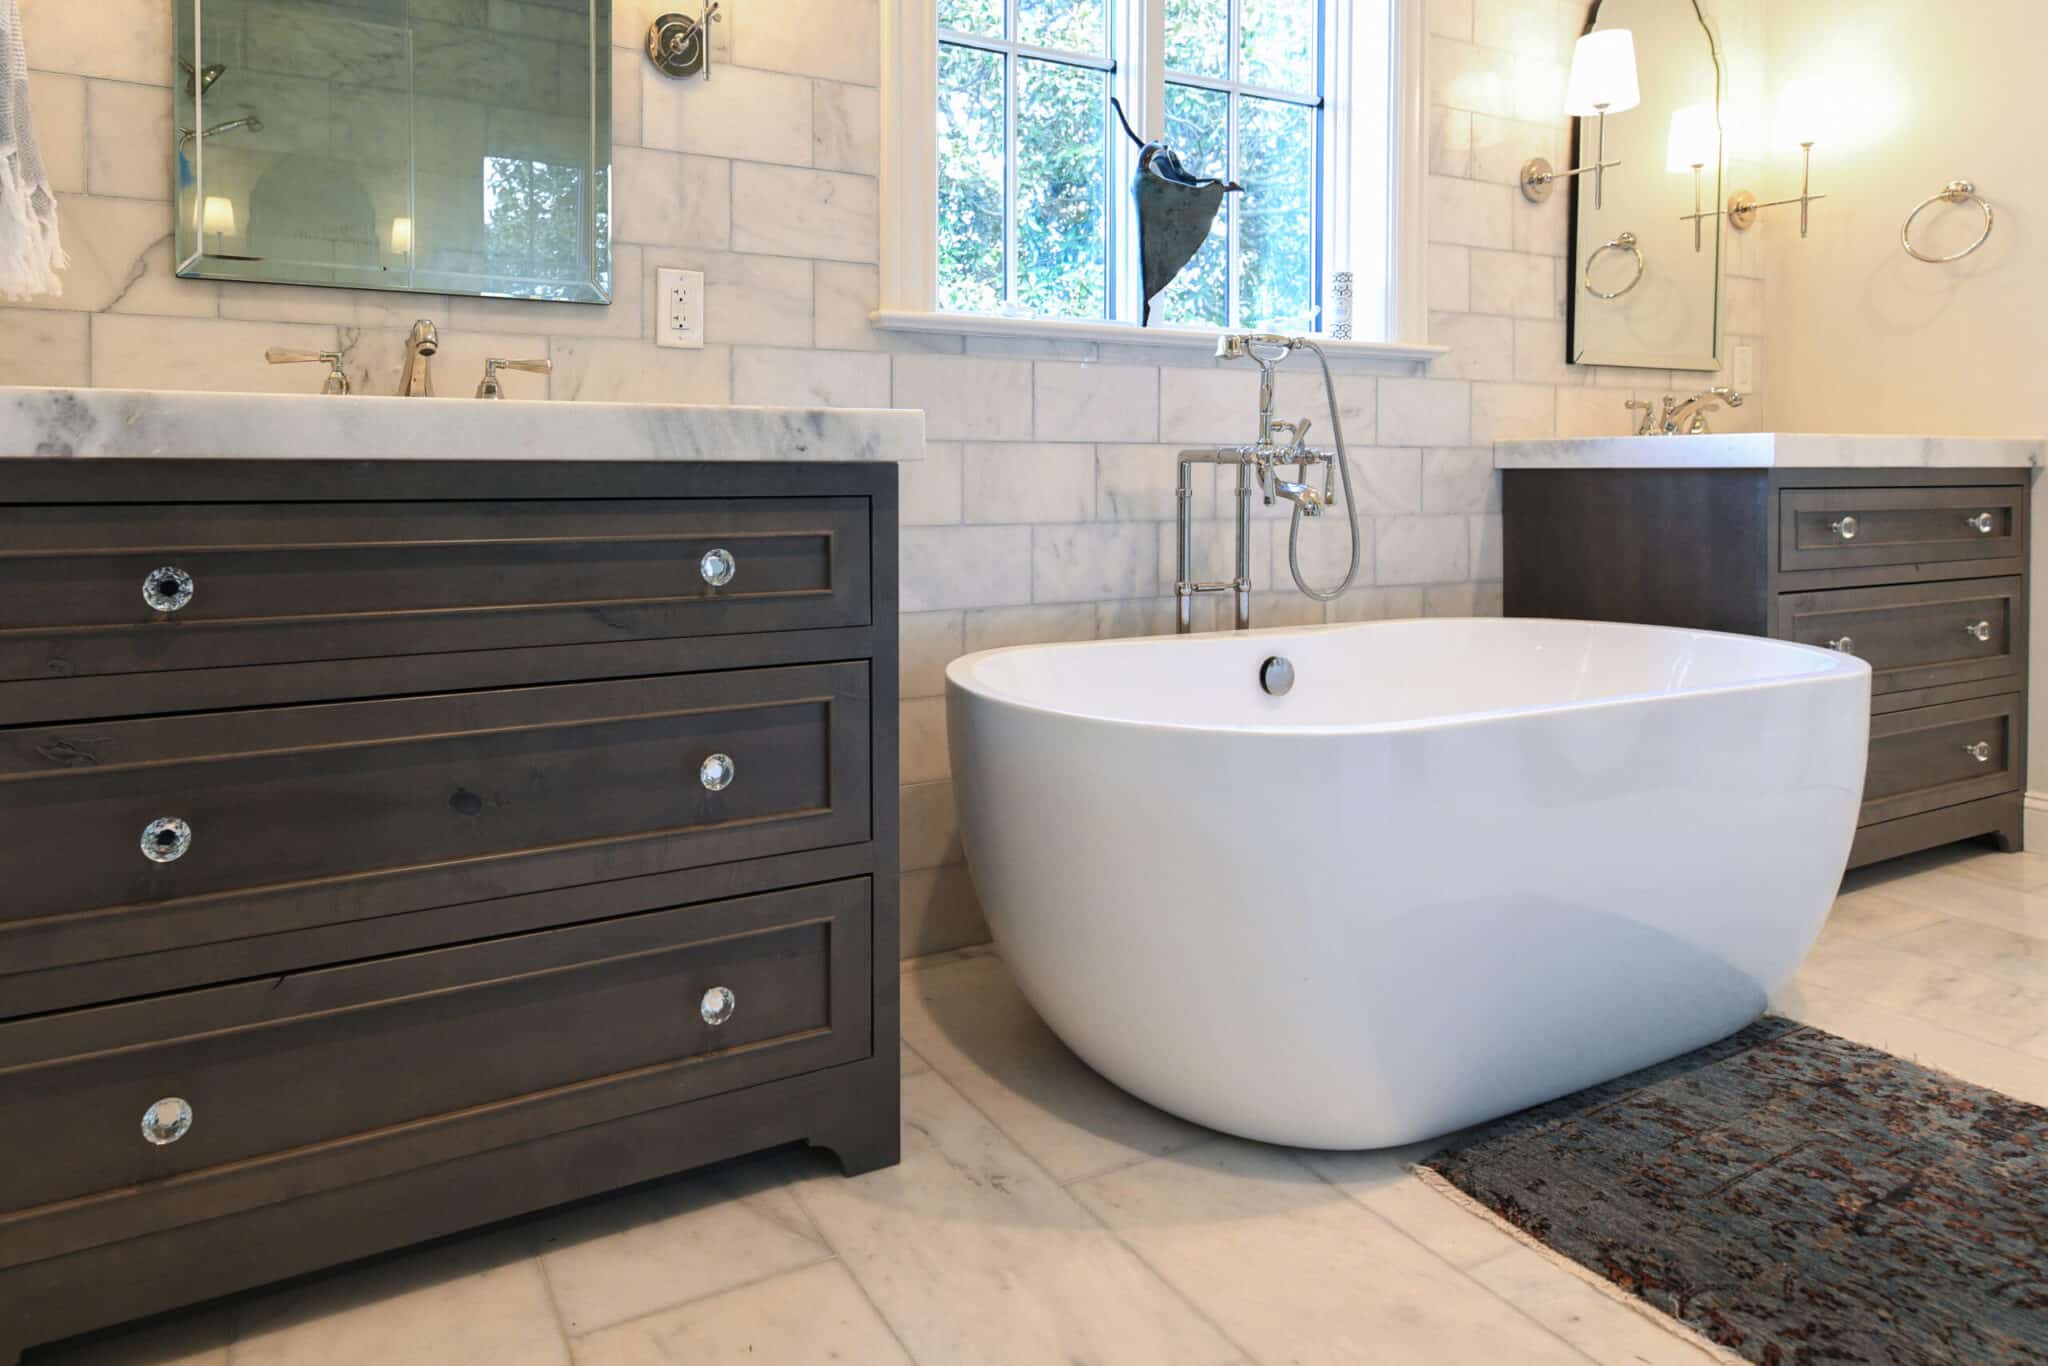 Modern bathroom style with two dark brown cabinets and bath tub in between